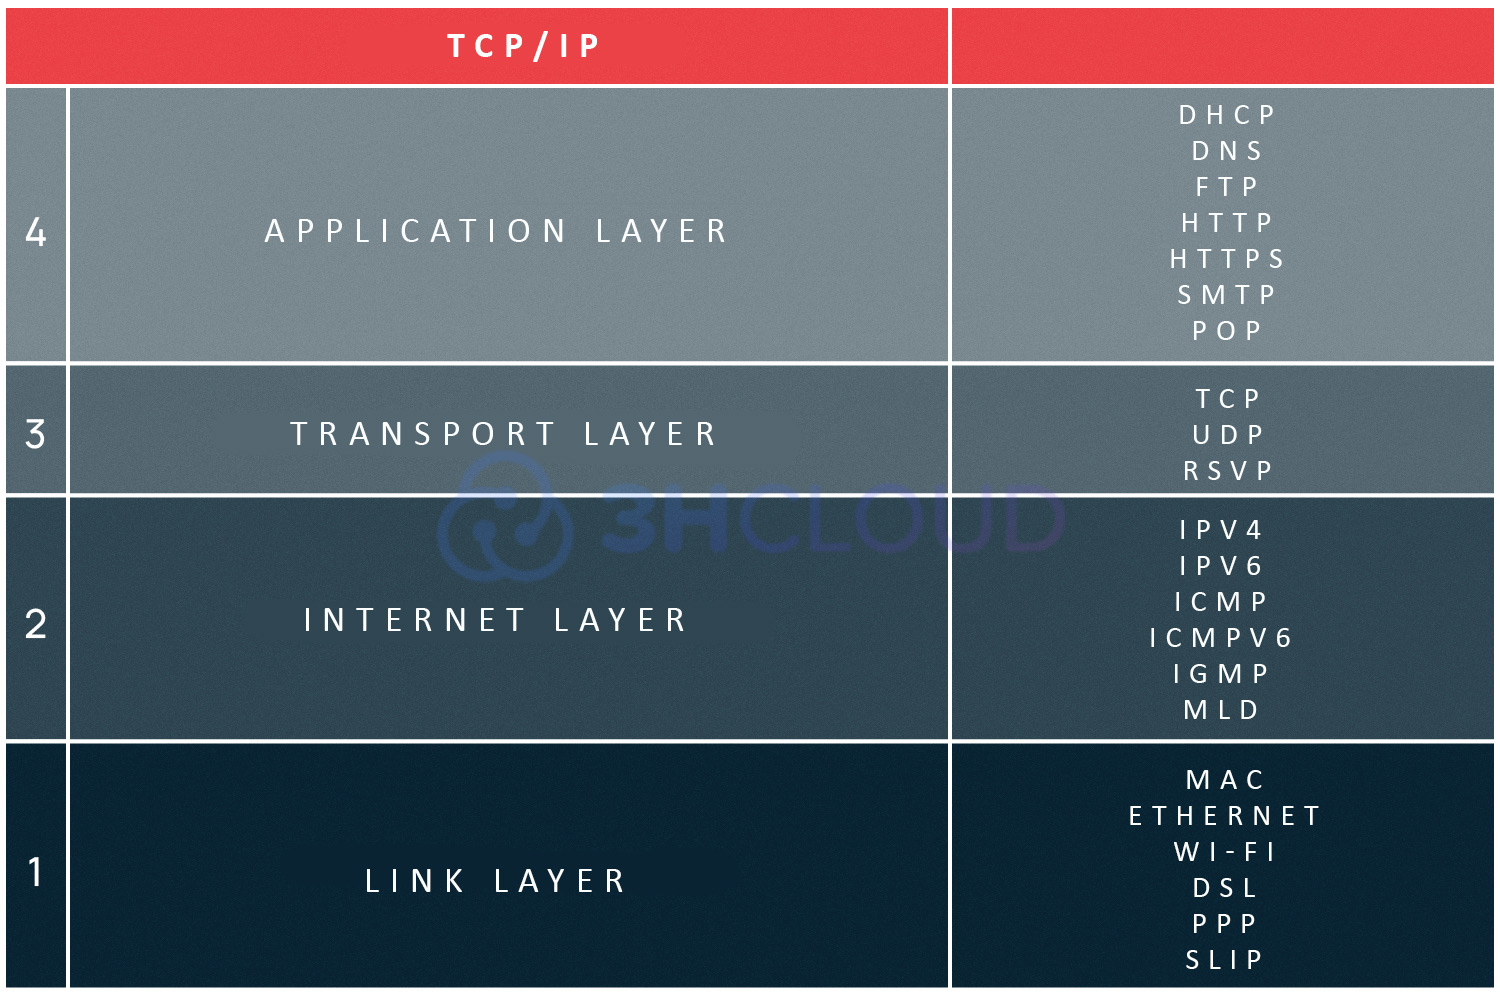 TCP/IP Protocol Stack Guide For Beginners: Basics, Layer Model